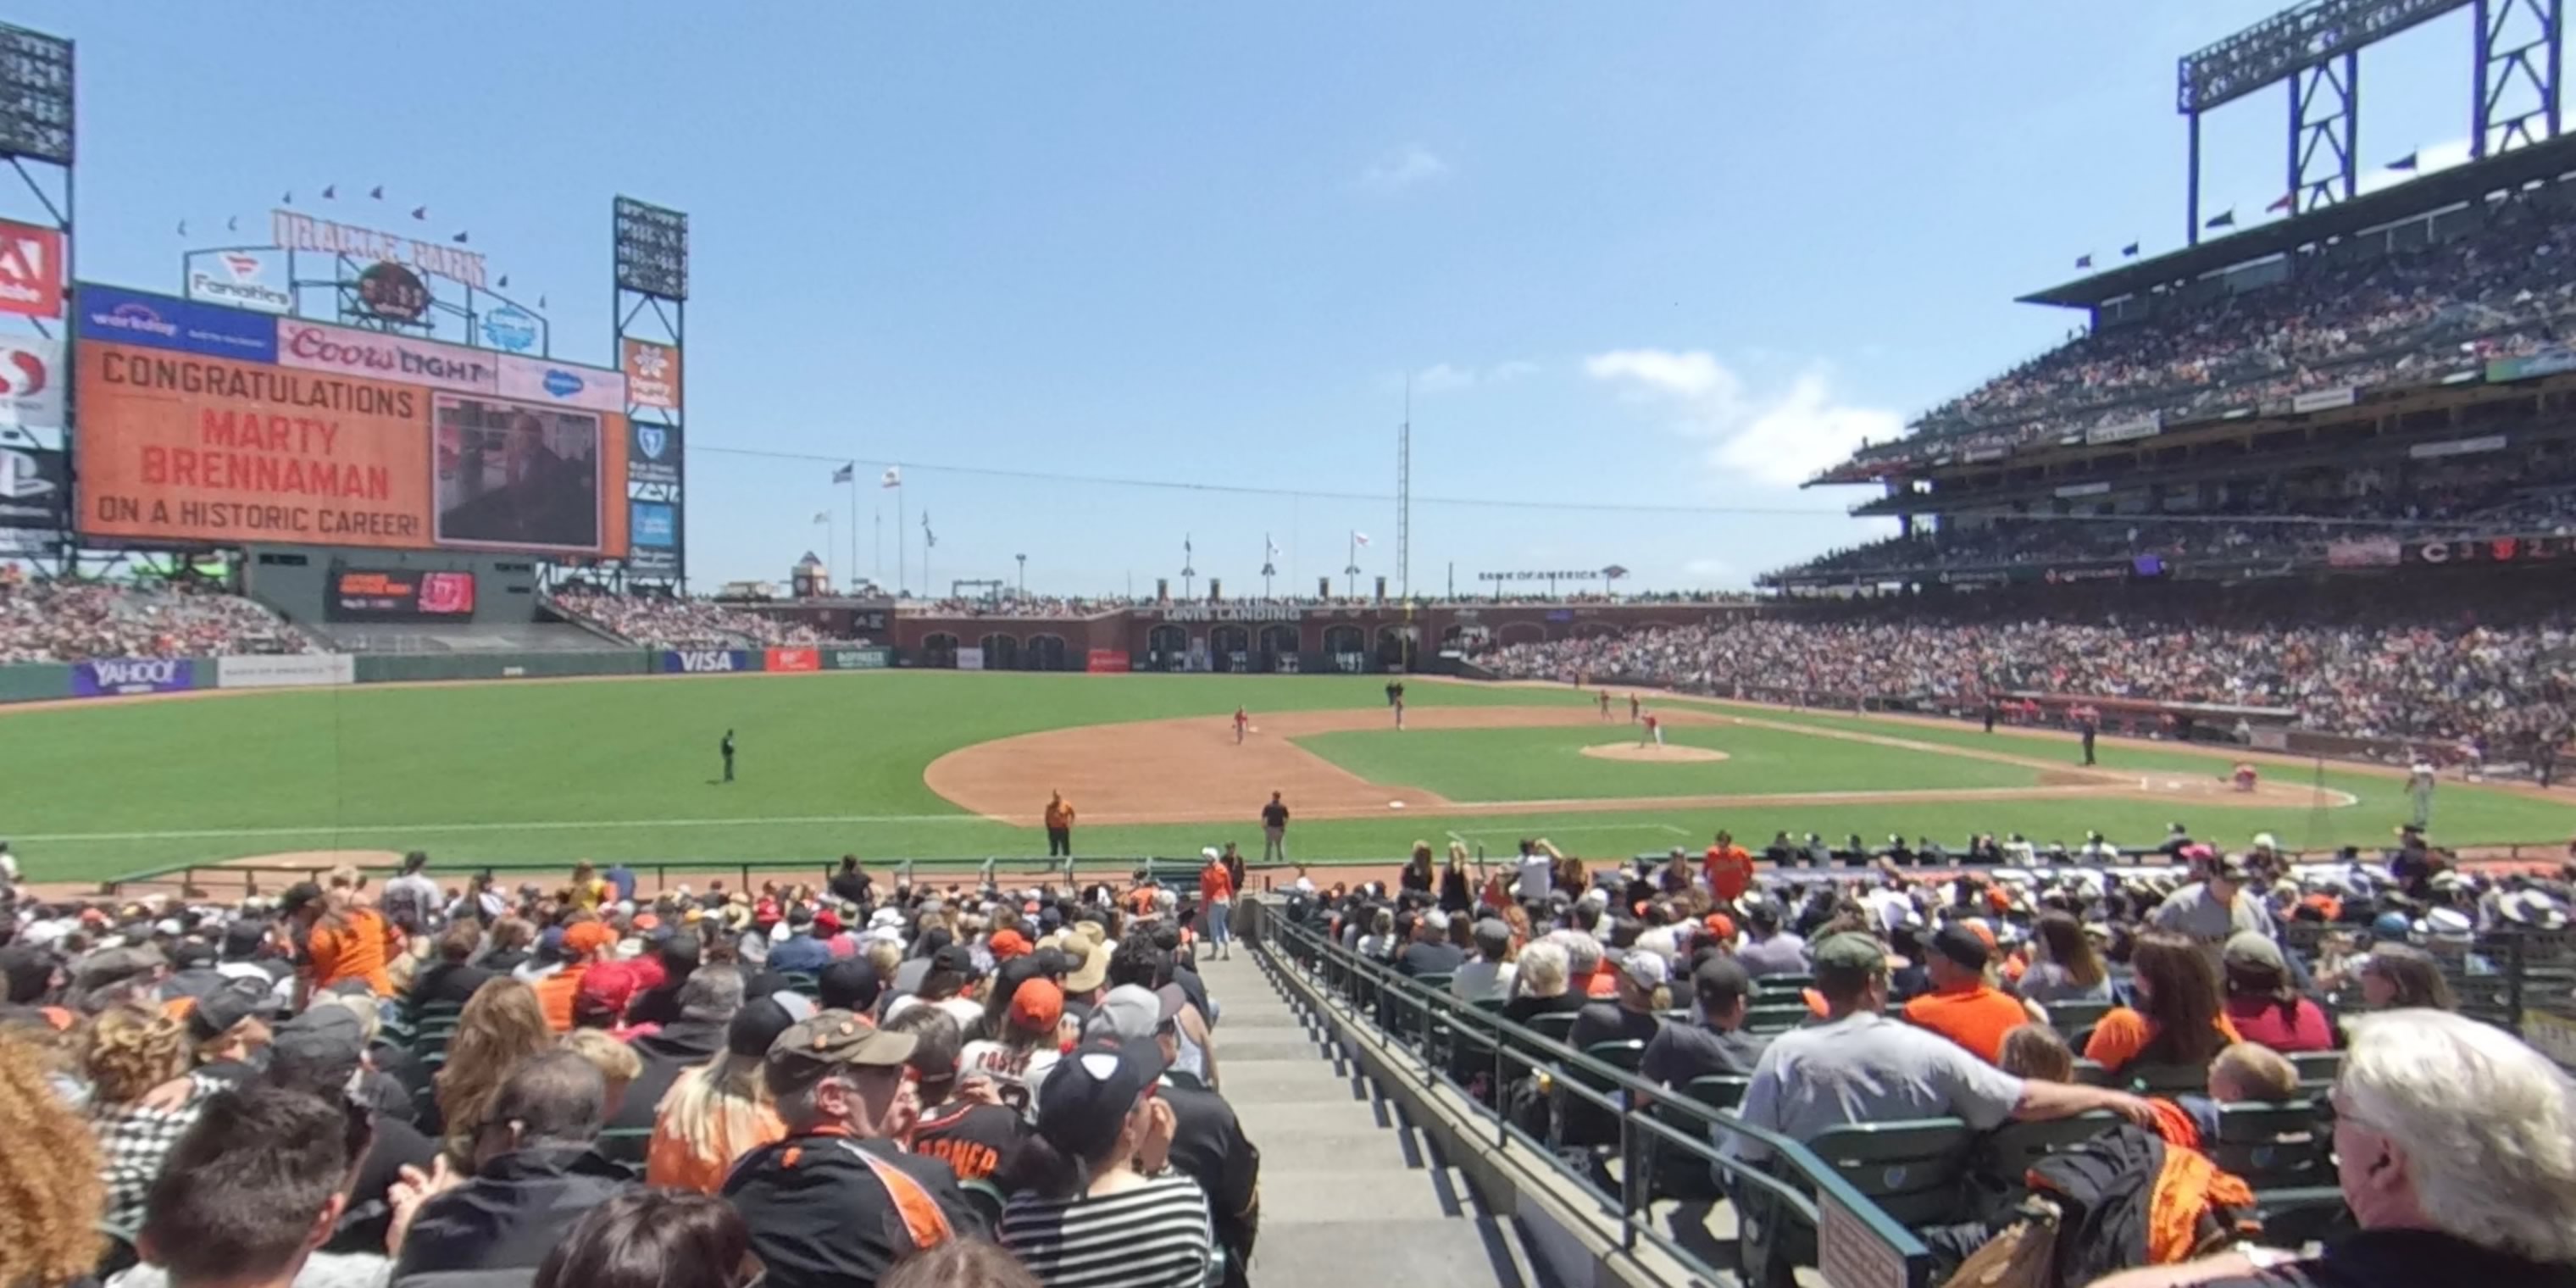 section 124 panoramic seat view  for baseball - oracle park